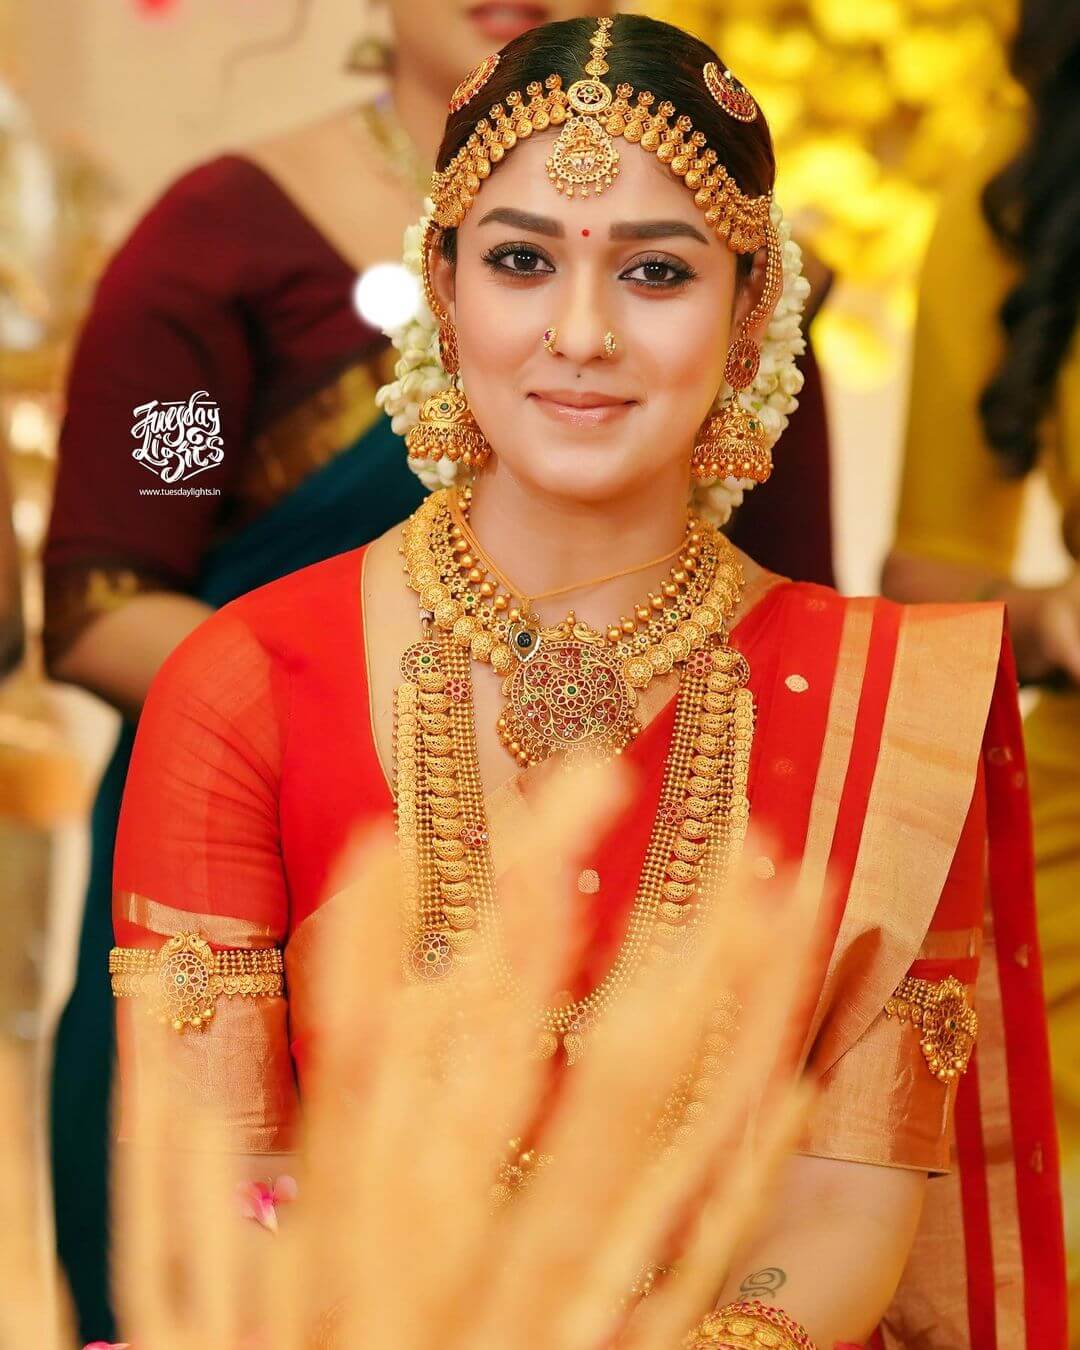 South Indian Bridal Jewellry With Bridal Hair Clips And Two Nose Rings